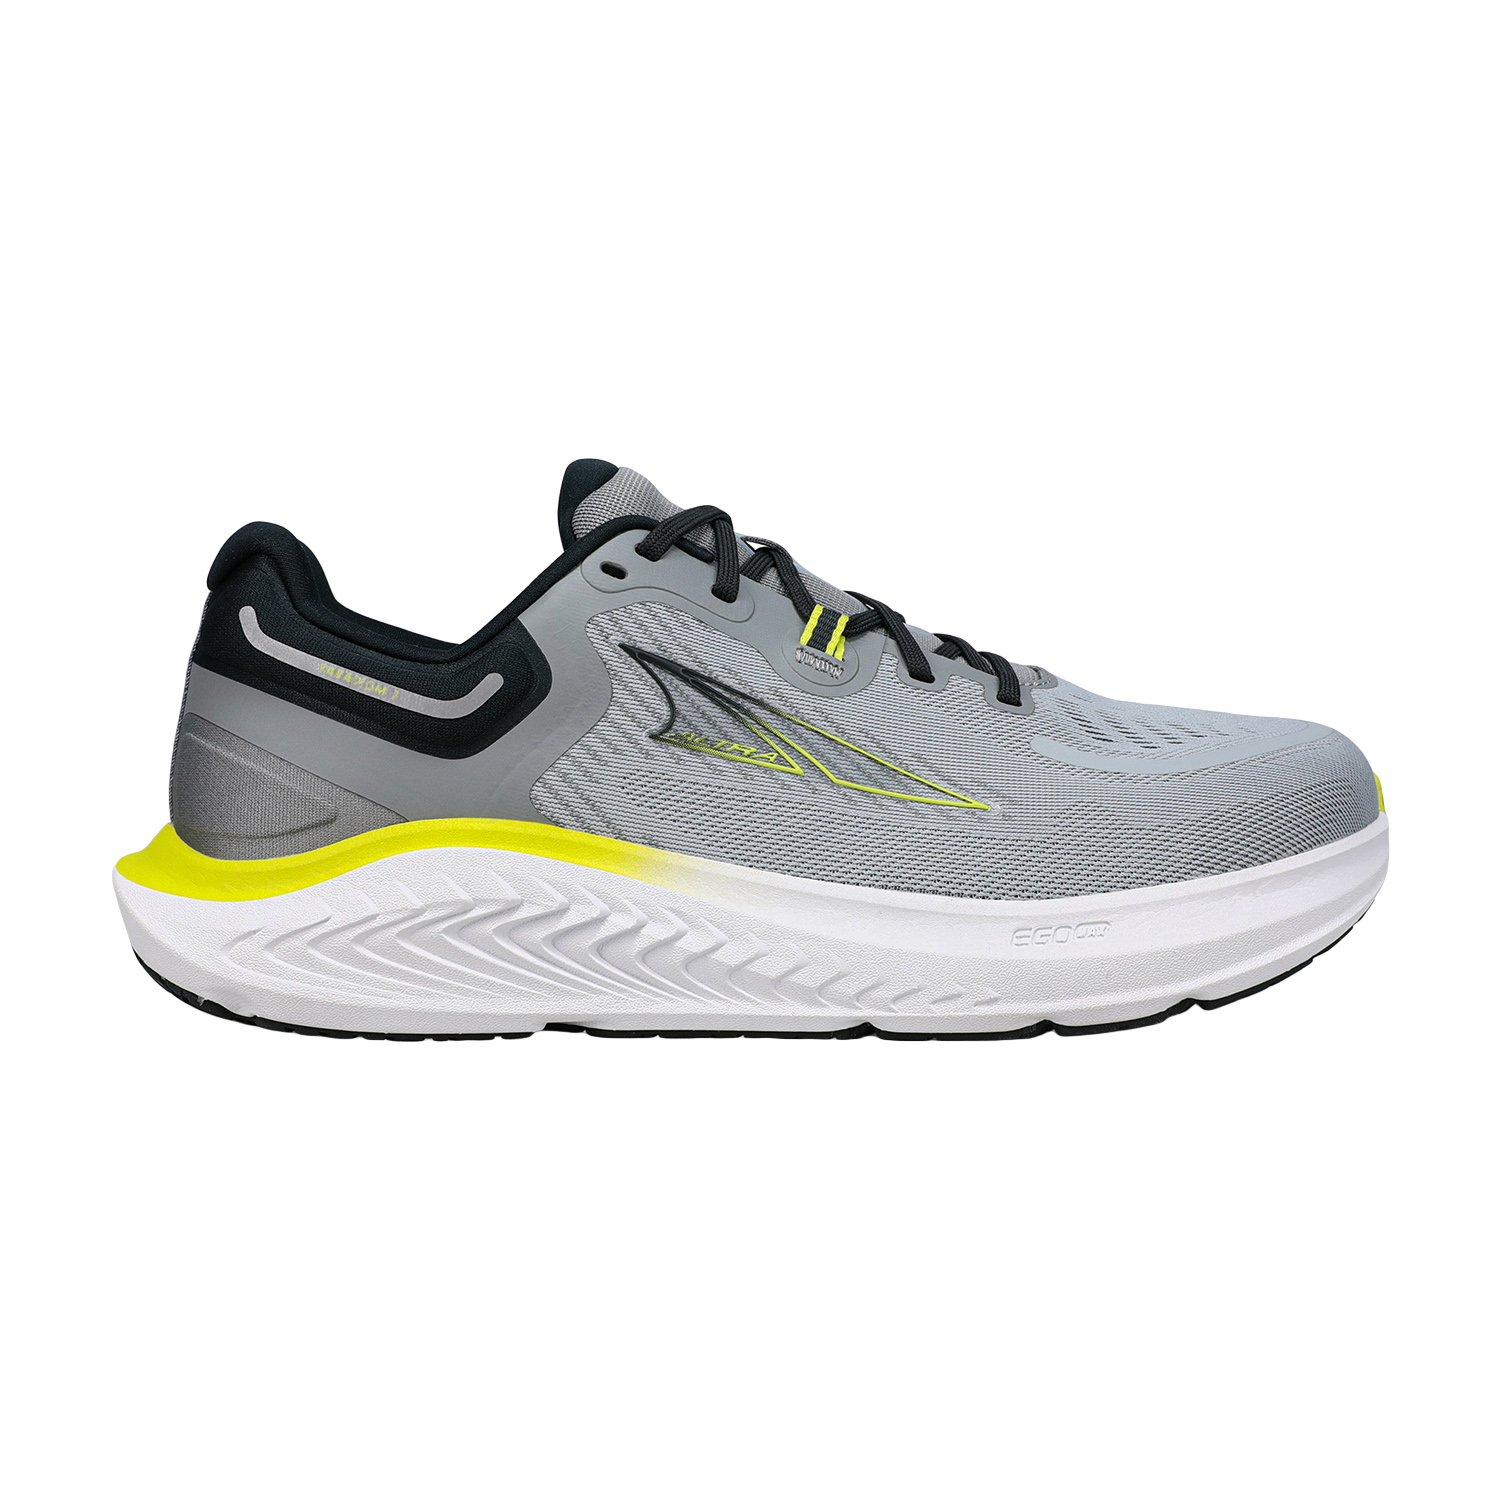 Altra Paradigm 7 Men's Running Shoes - Gray/Lime